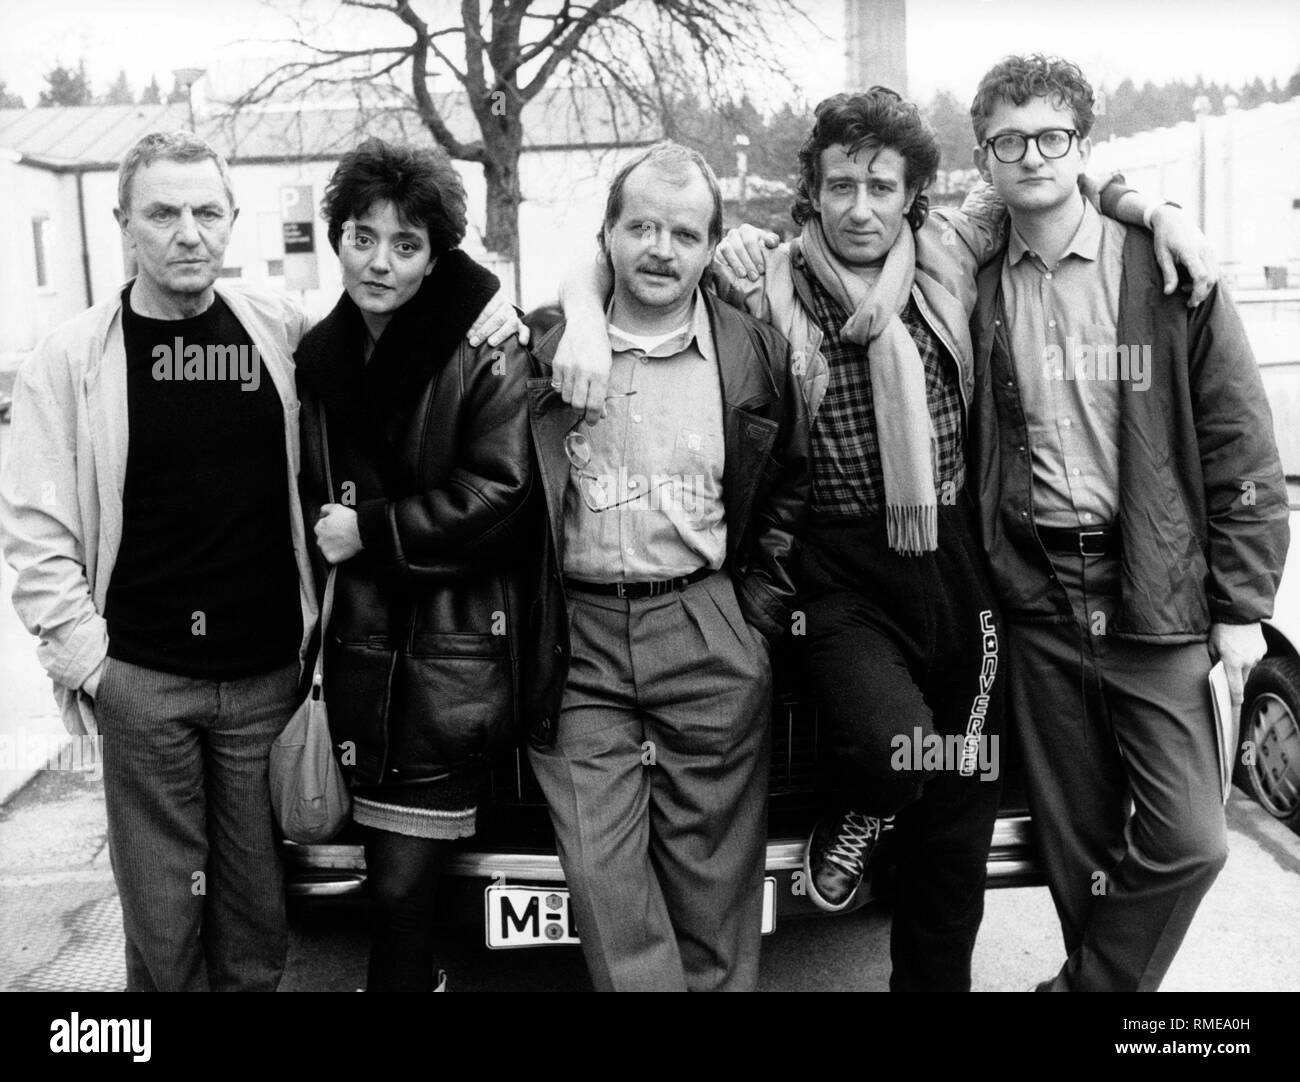 Film director Peter F. Bringmann (middle) and the actors of the ARD movie 'Gambit' (from left to right): Heinz Bennet, Despina Pajanou, Rolf Zacher and Dominic Raacke. Stock Photo